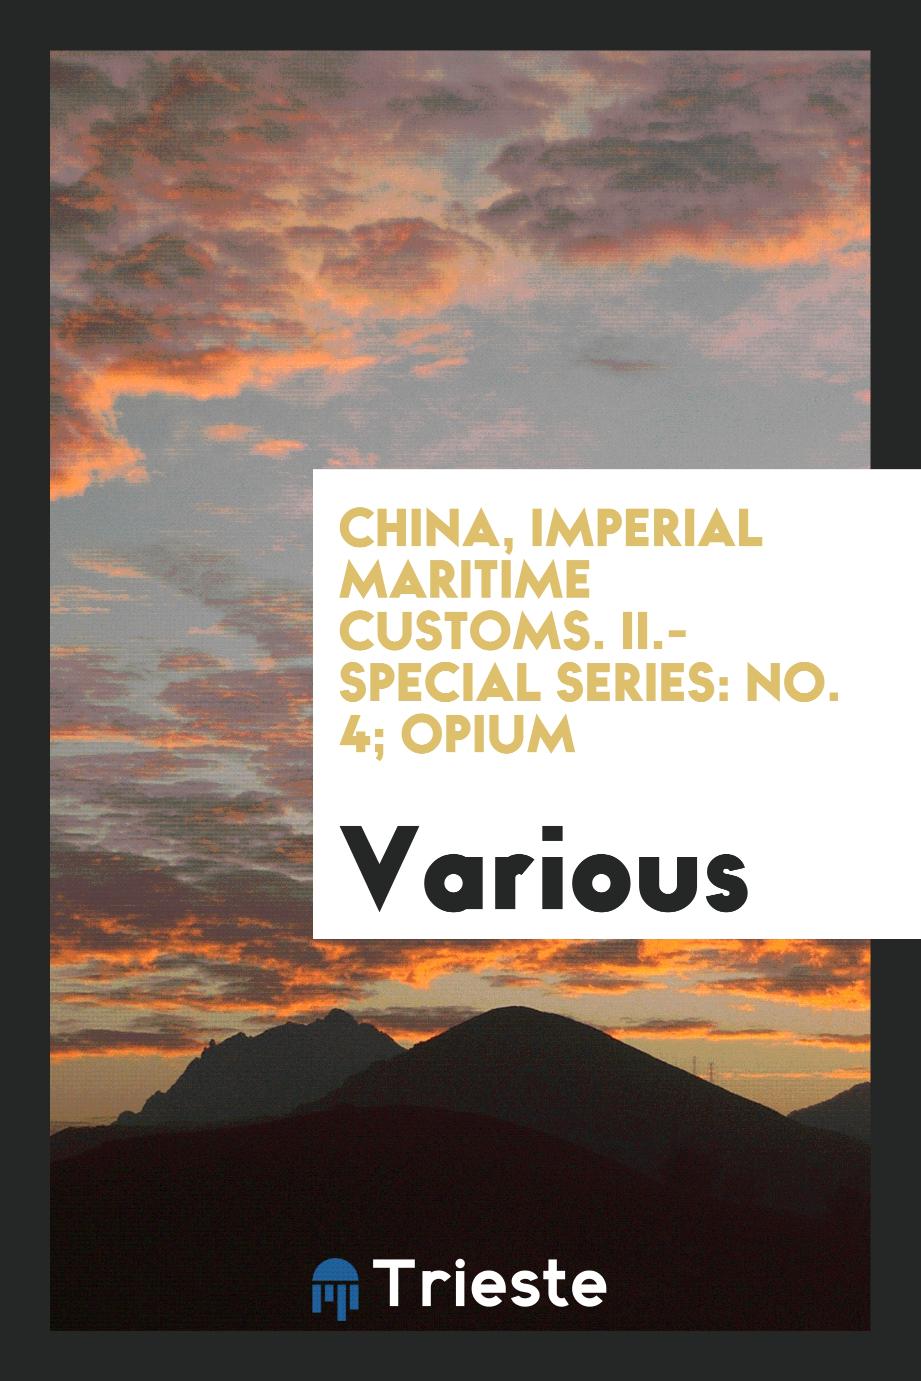 China, Imperial Maritime Customs. II.-Special series: No. 4; Opium